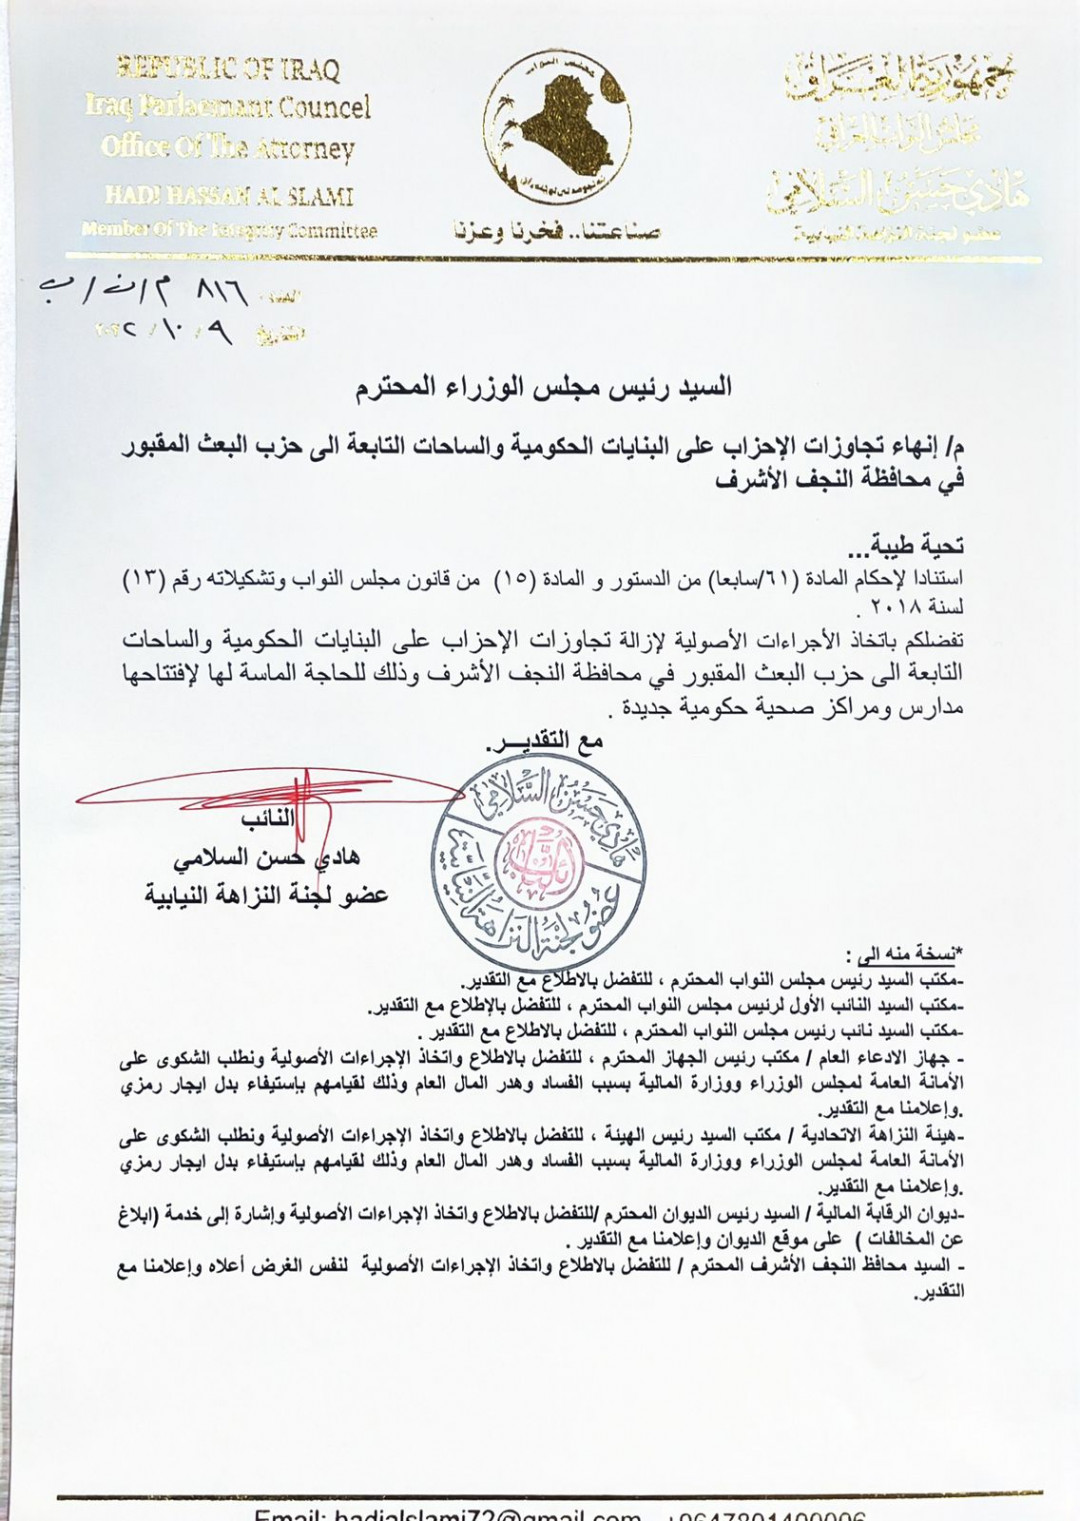 Document .. A parliamentarian addresses Al-Kazemi to remove the parties' abuses on the buildings of the Baath Party